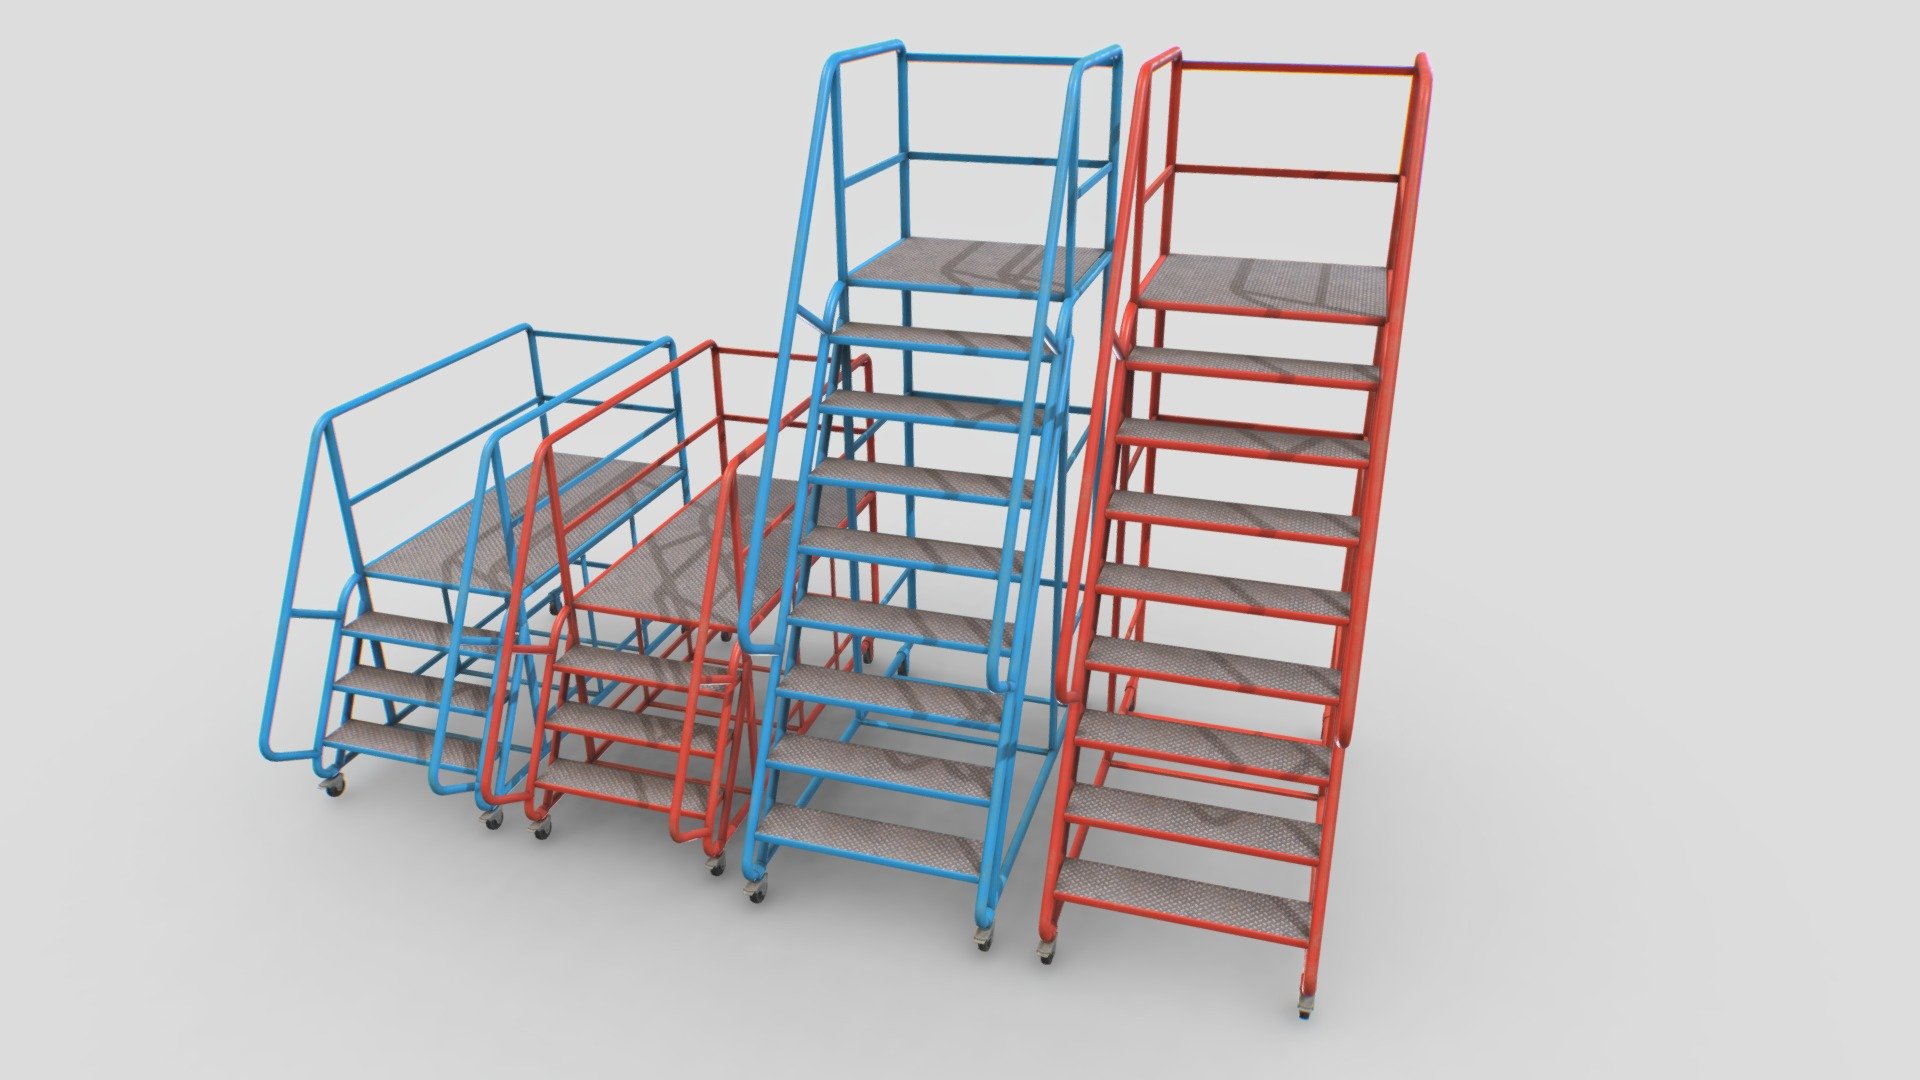 Industrial mobile stairs based in real ones. Real scale. Comes with 4096x PBR textures including Albedo, Normal, Metalness, Smoothness, Roughness and AO.

Model comes as a full object (static) and in parts so you can move it (wheels). Also comes with 2 sets of textures, blue and red.

Total polys 11000. 5000 verts each stair 3d model